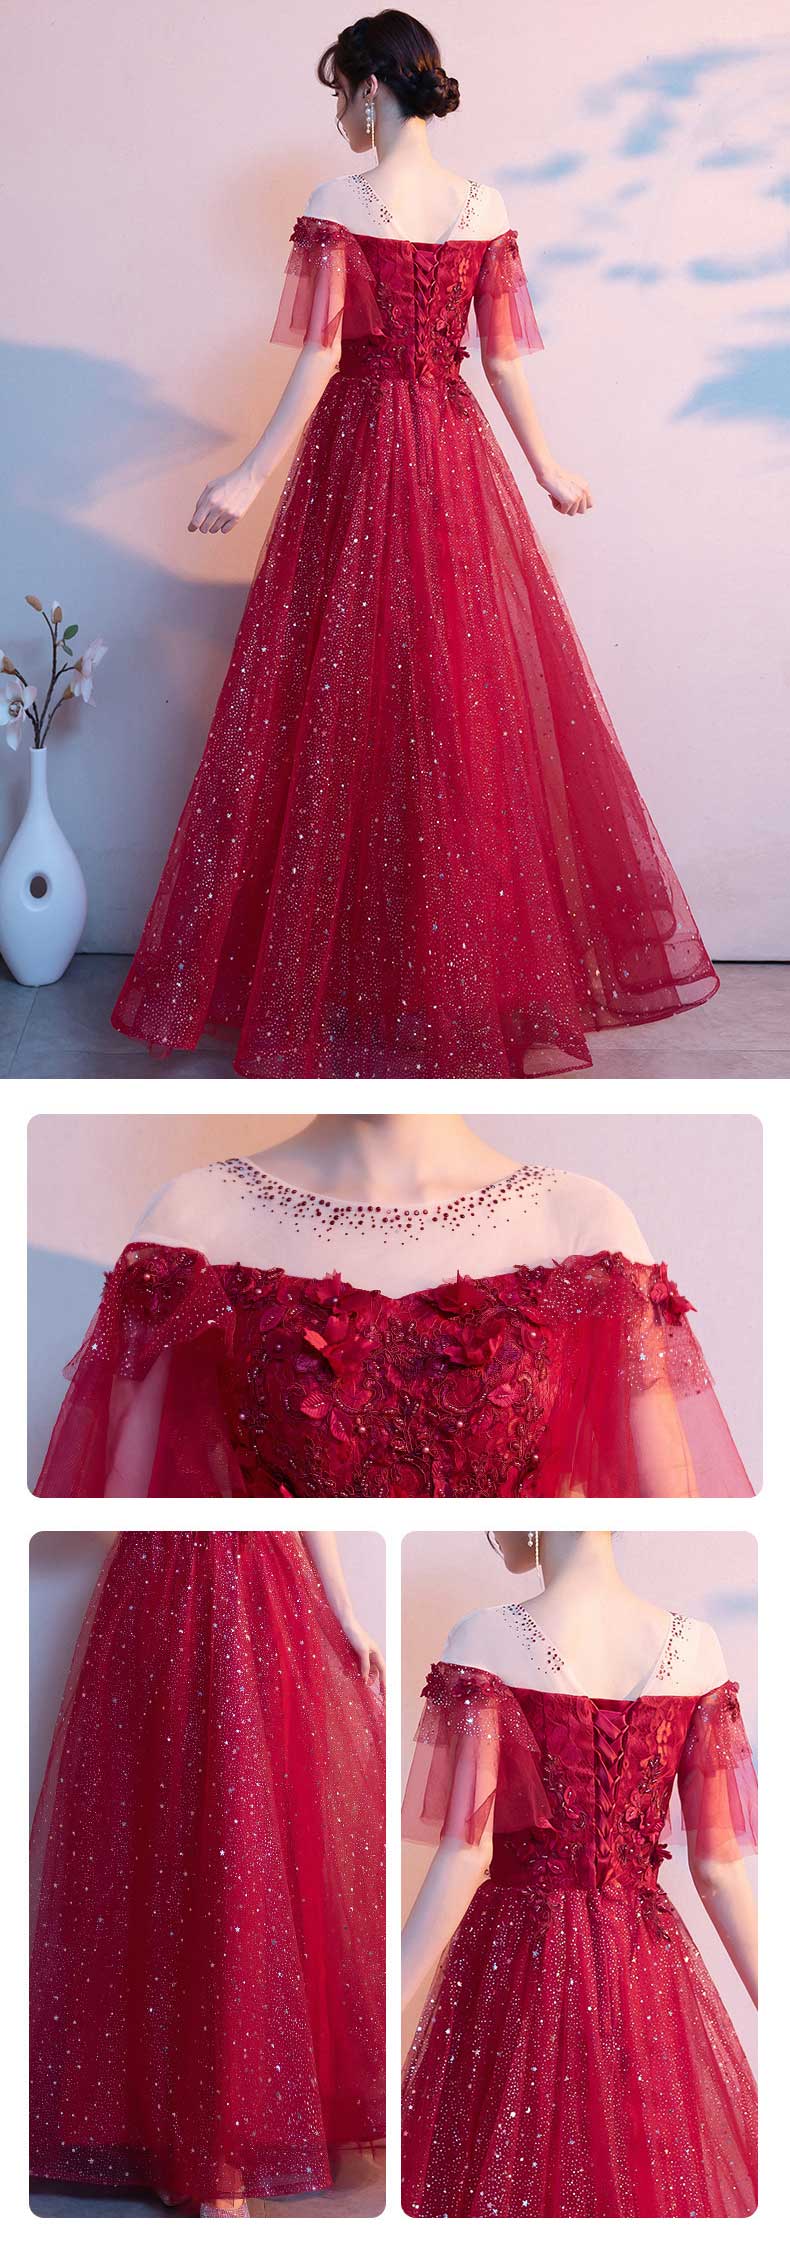 Sweet-Off-Shoulder-Chiffon-Wine-Red-Cocktail-Prom-Long-Dress14